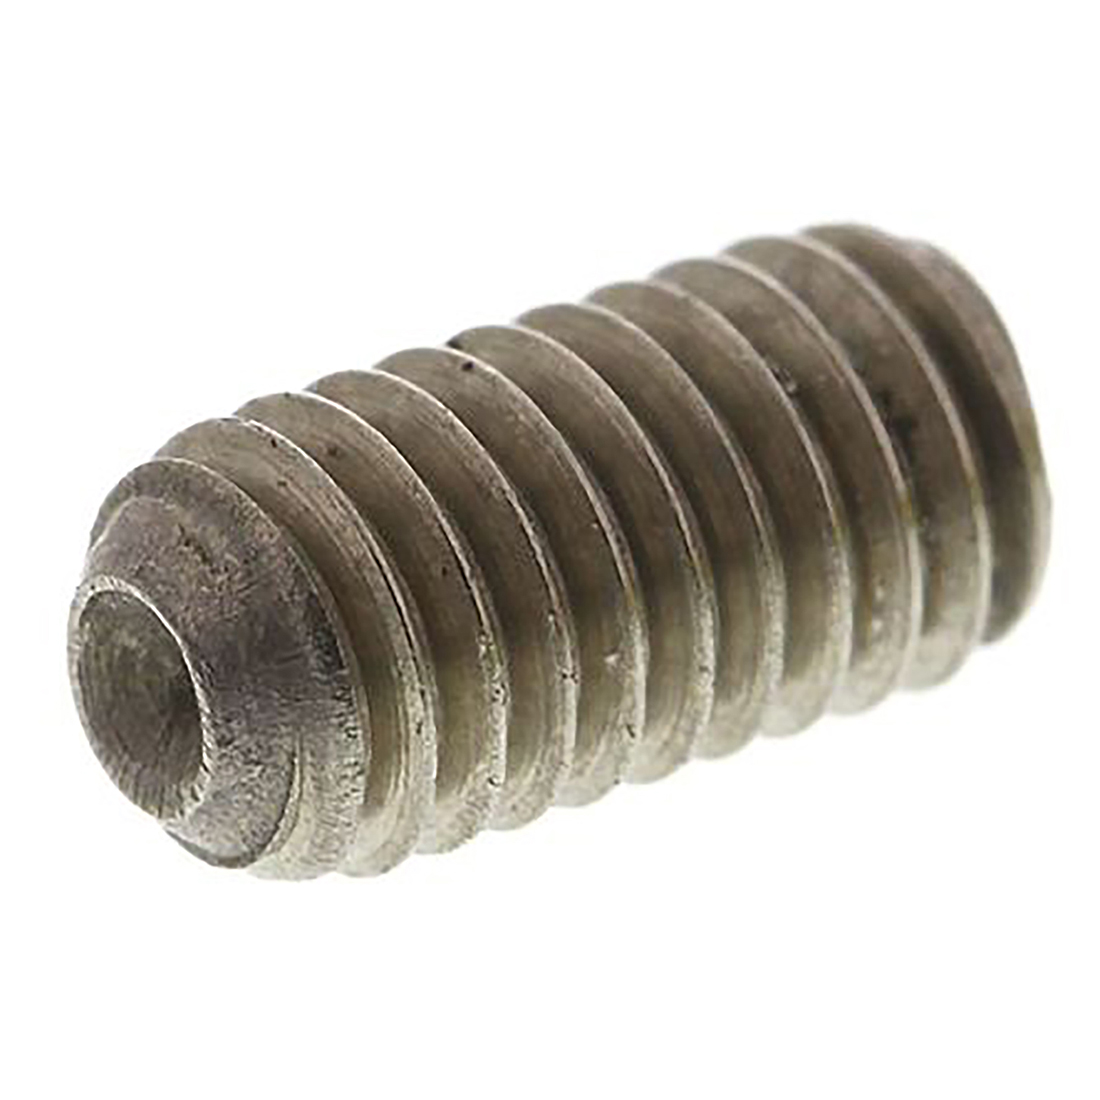 Stainless Steel 40mm Length, M3-0.5 Screw Size Hex Standoff 4.5mm OD Female Pack of 5 